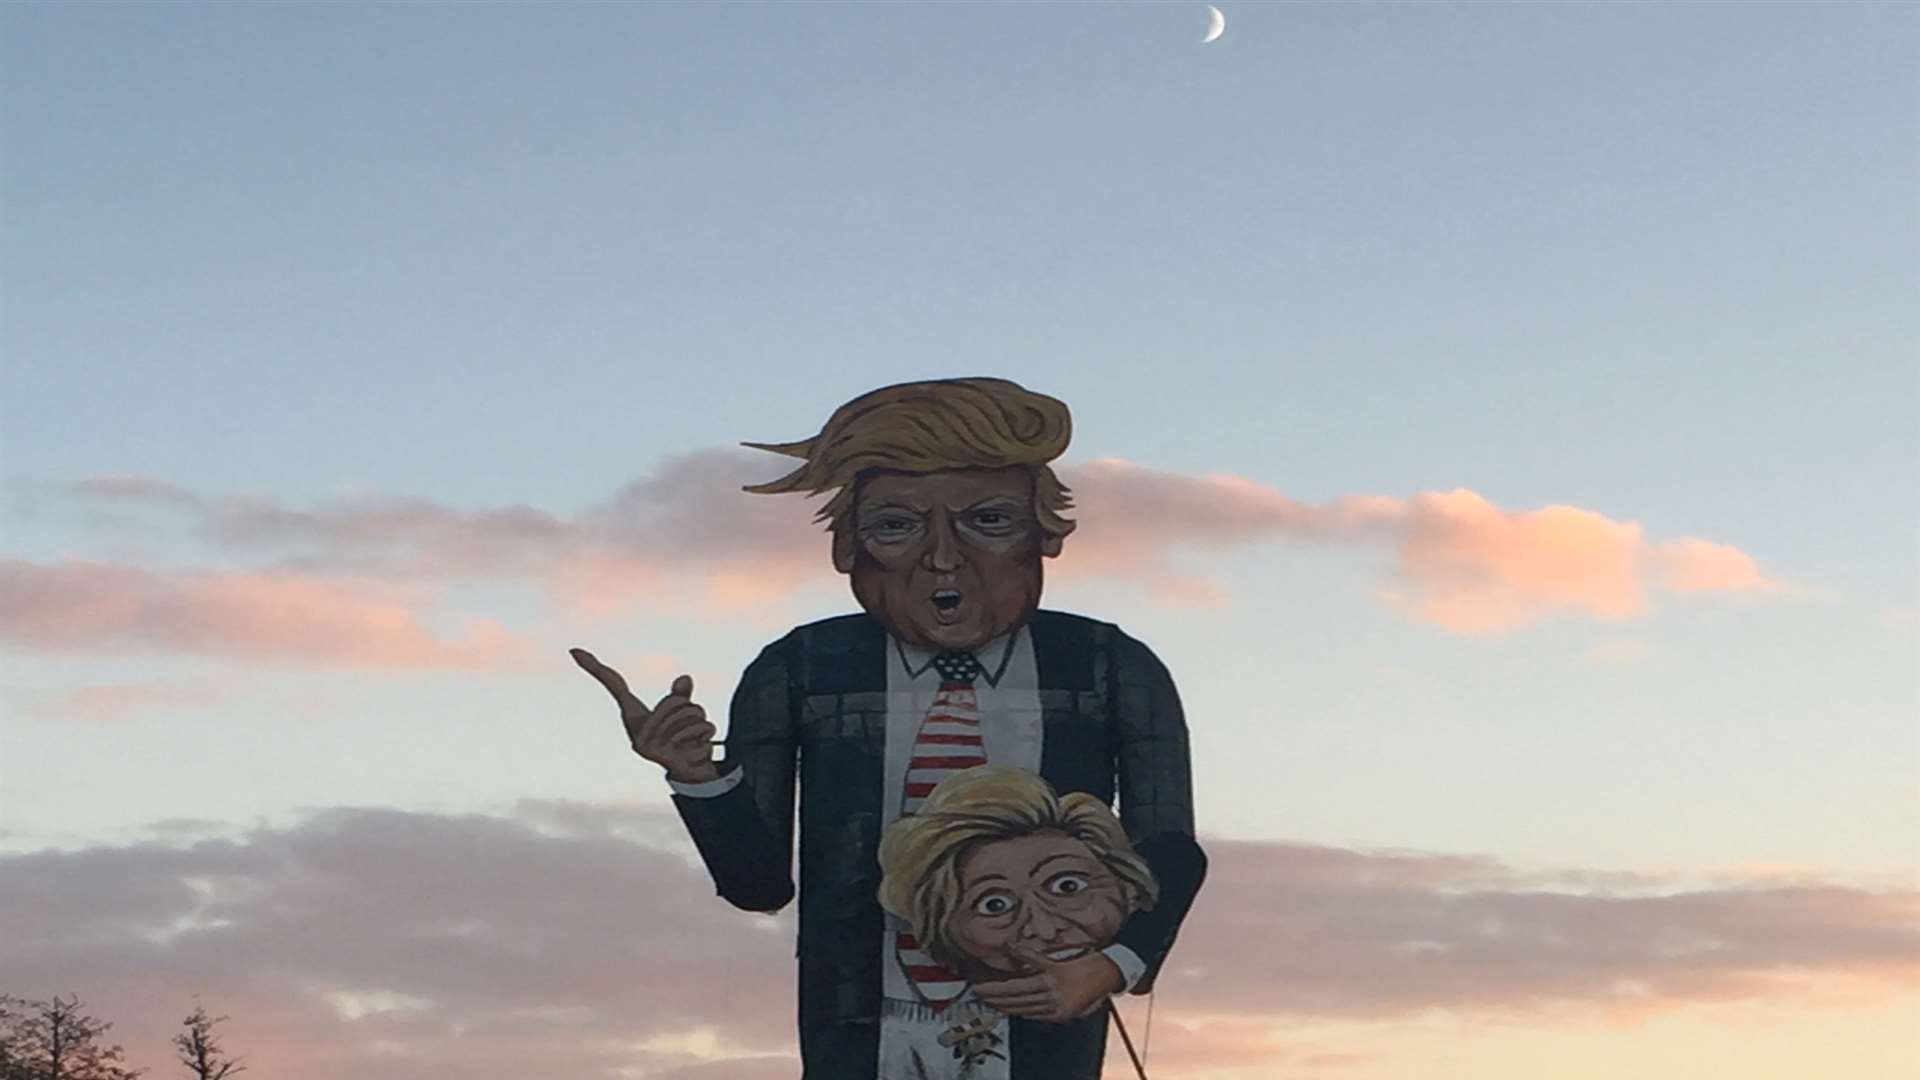 The Donald Trump figure waits for the torch